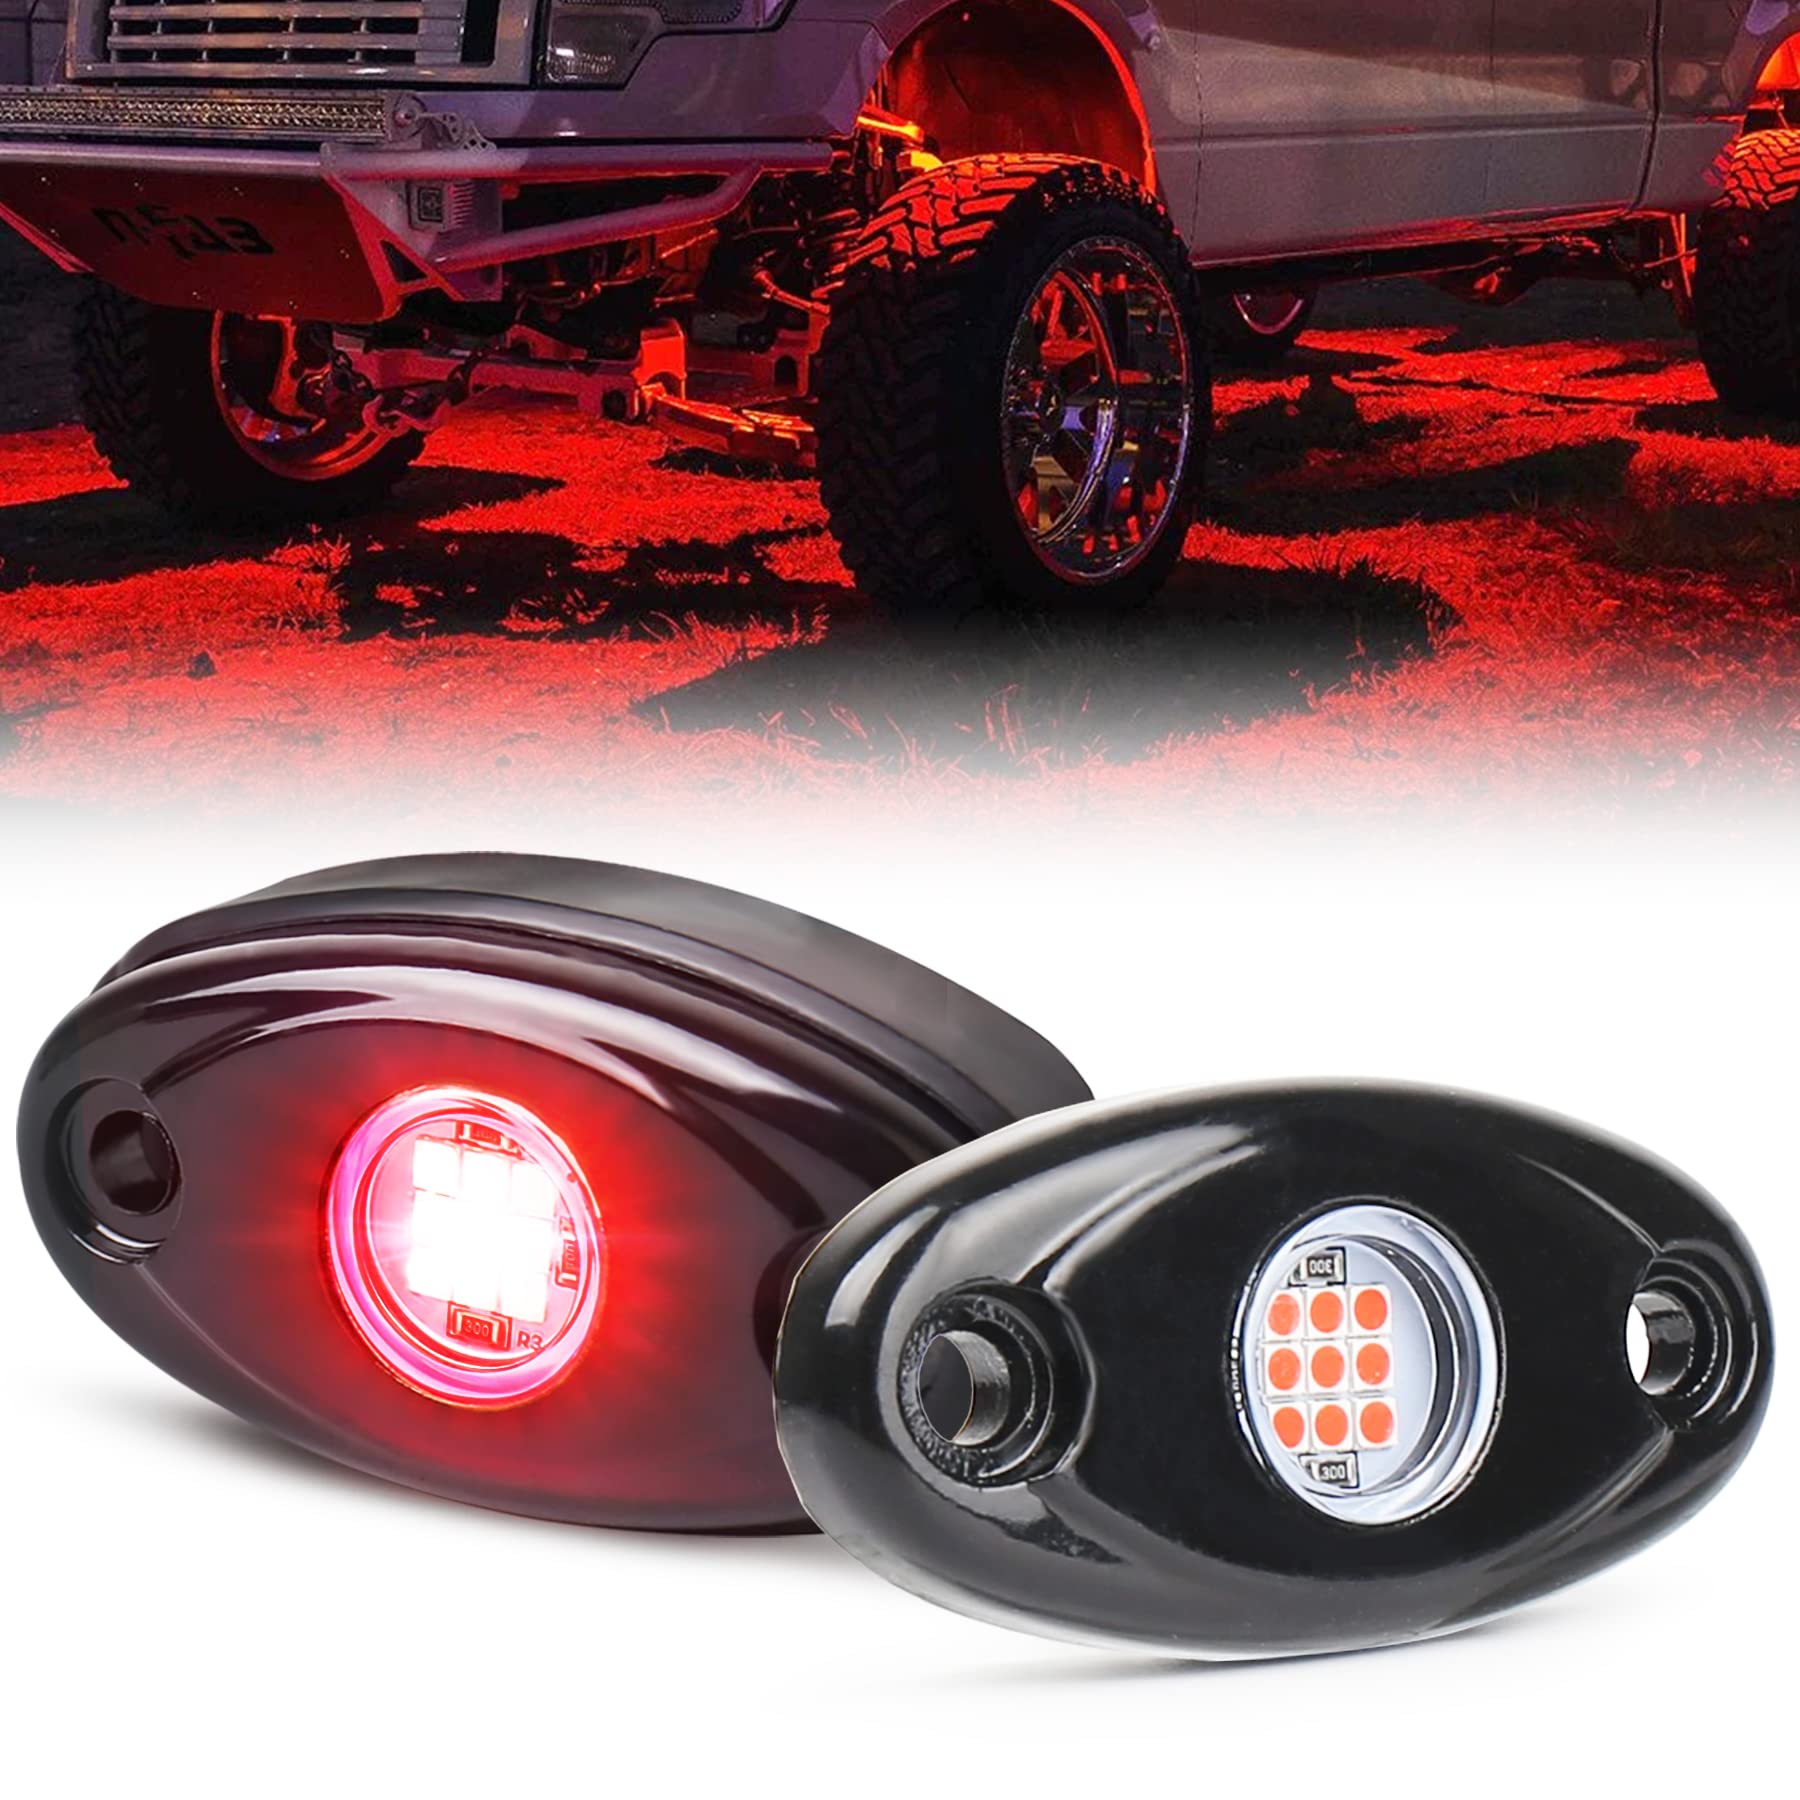 2 Pods LED Rock Lights, MOVOTOR Red Rock Lights Waterproof IP68 Neon Underglow Lights Compatible with Off Road Truck Pickups Cars ATV UTV SUV Motorcycle Boat